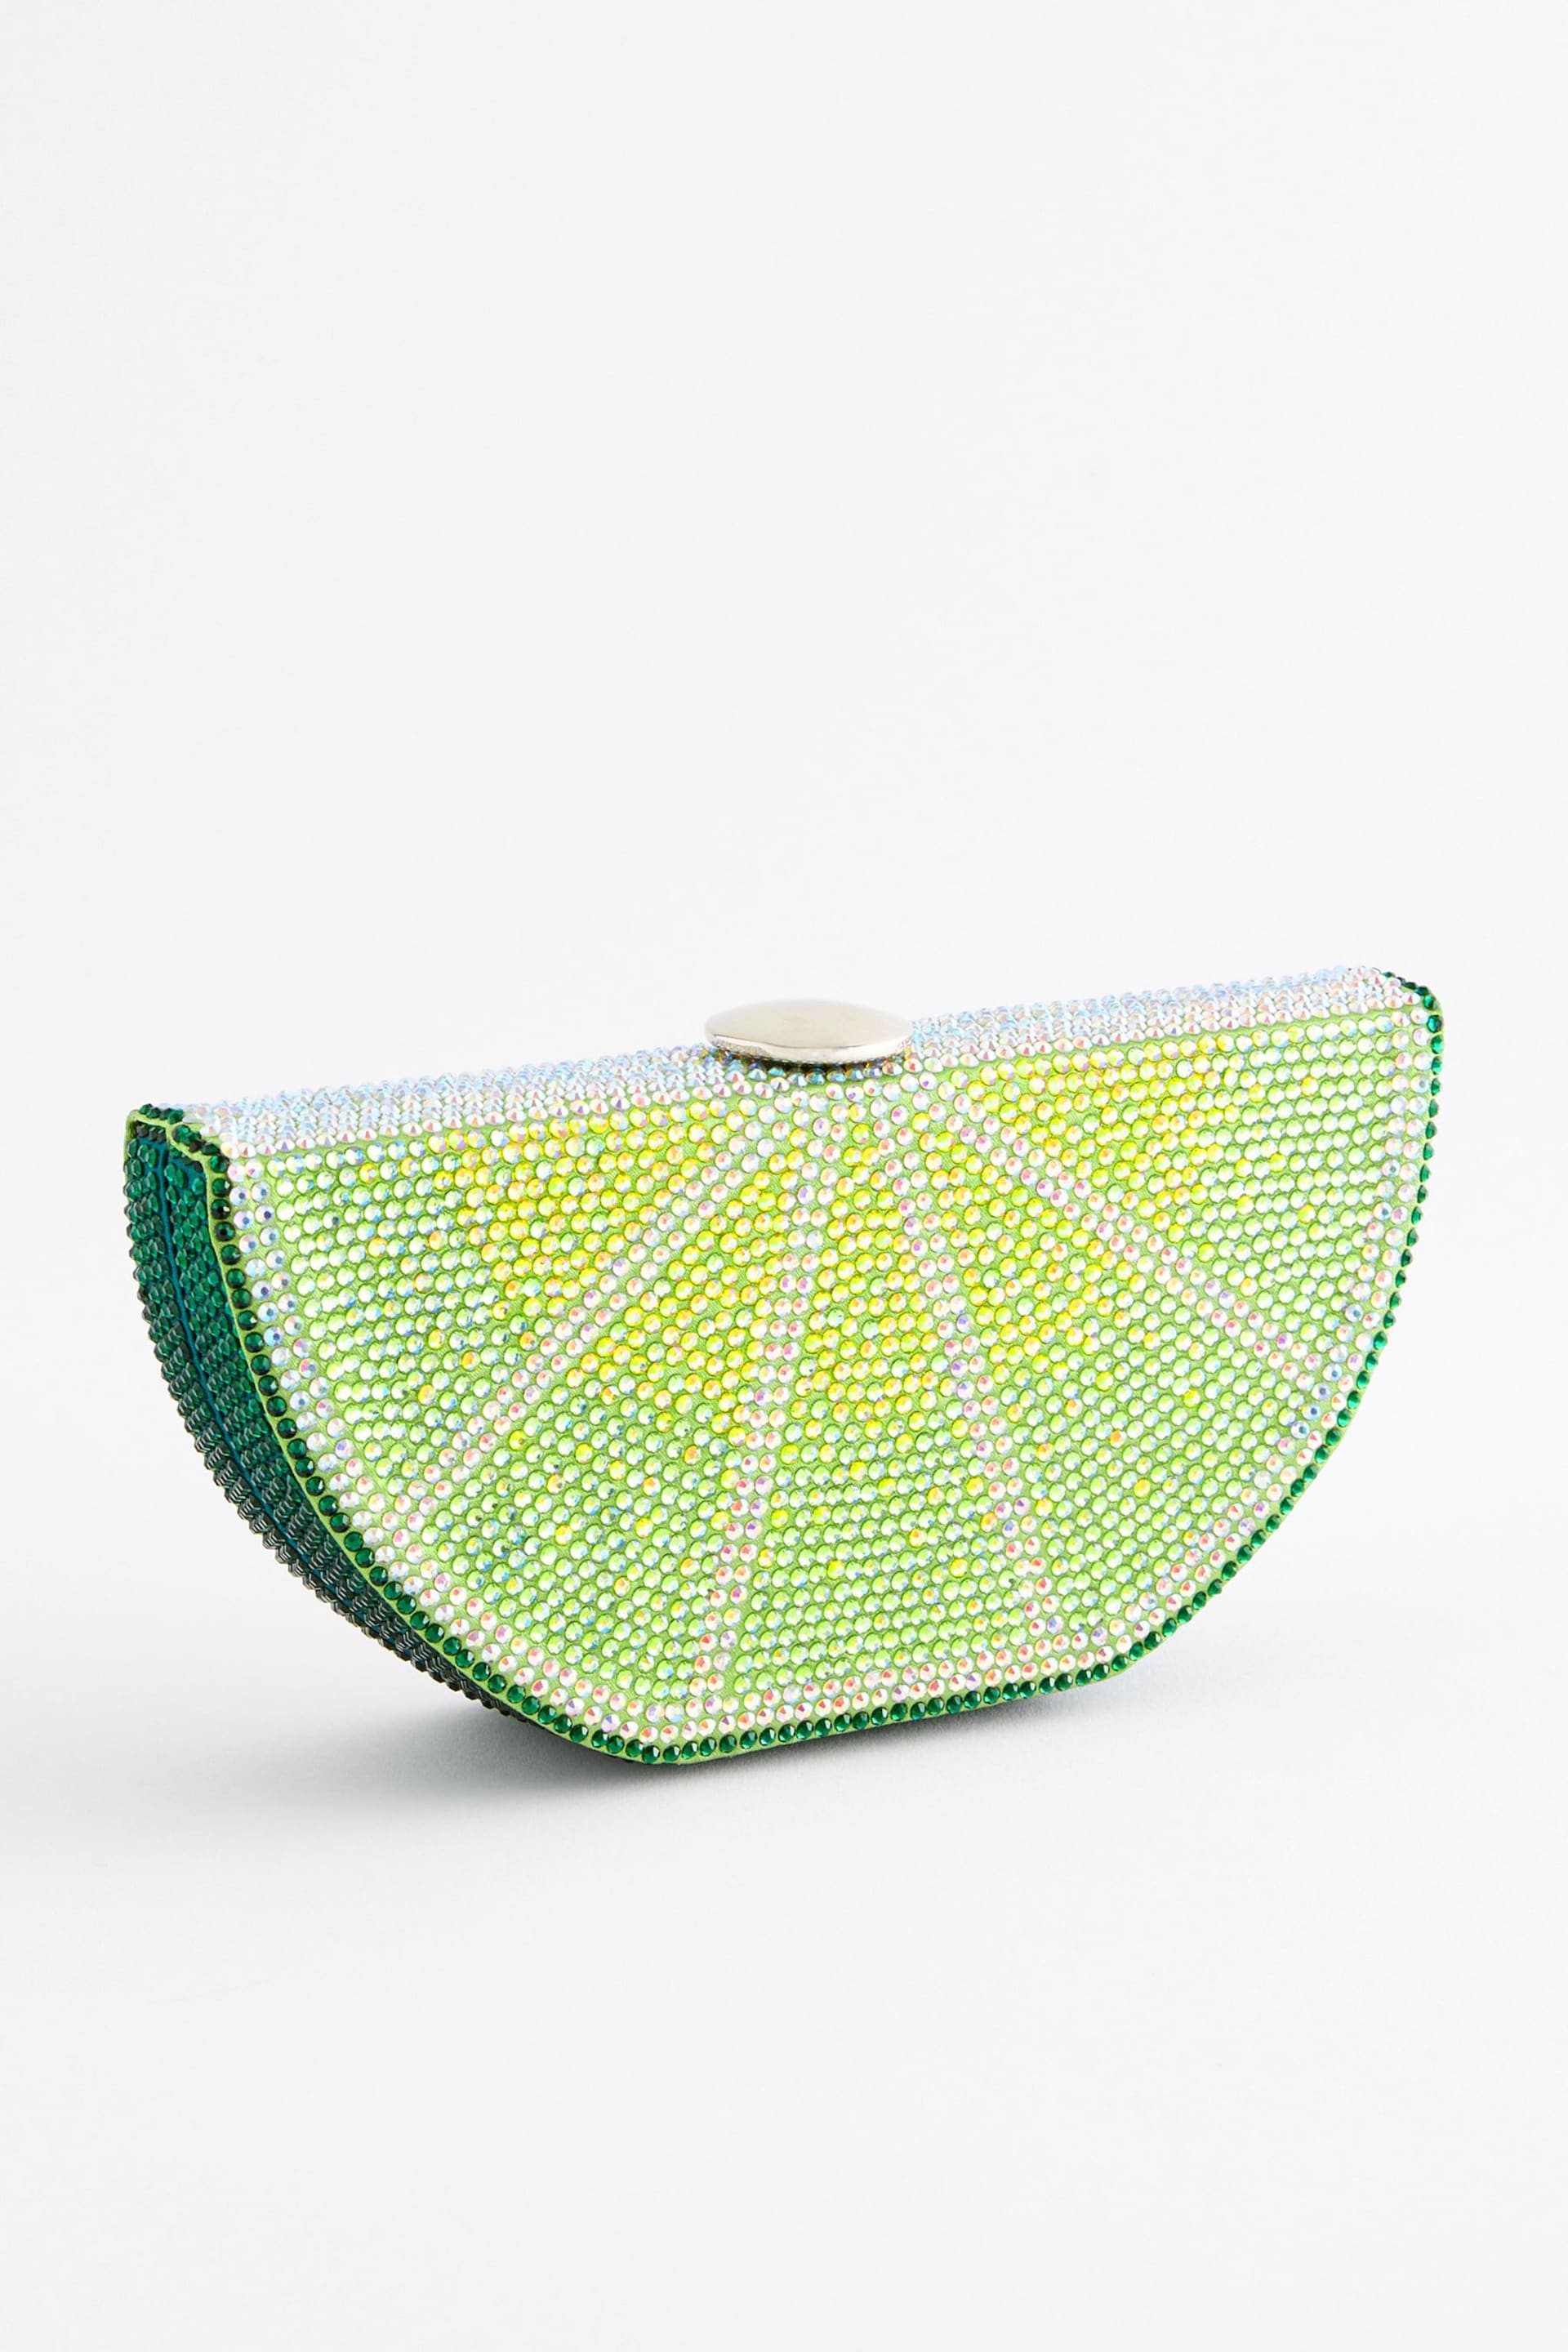 Lime Fruit Clutch - Image 2 of 5